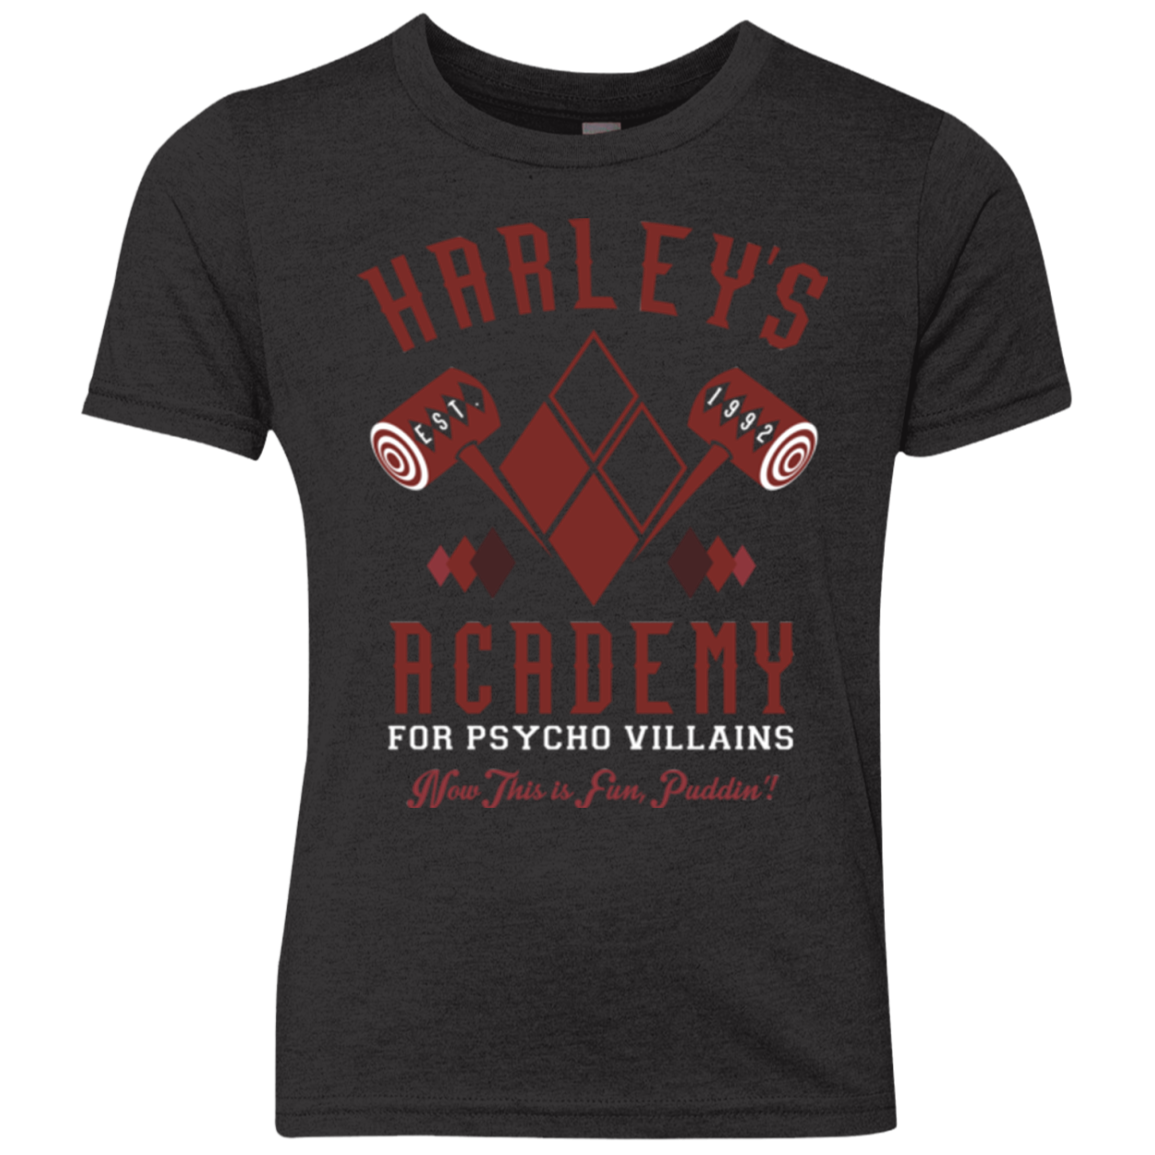 Harley's Academy Youth Triblend T-Shirt